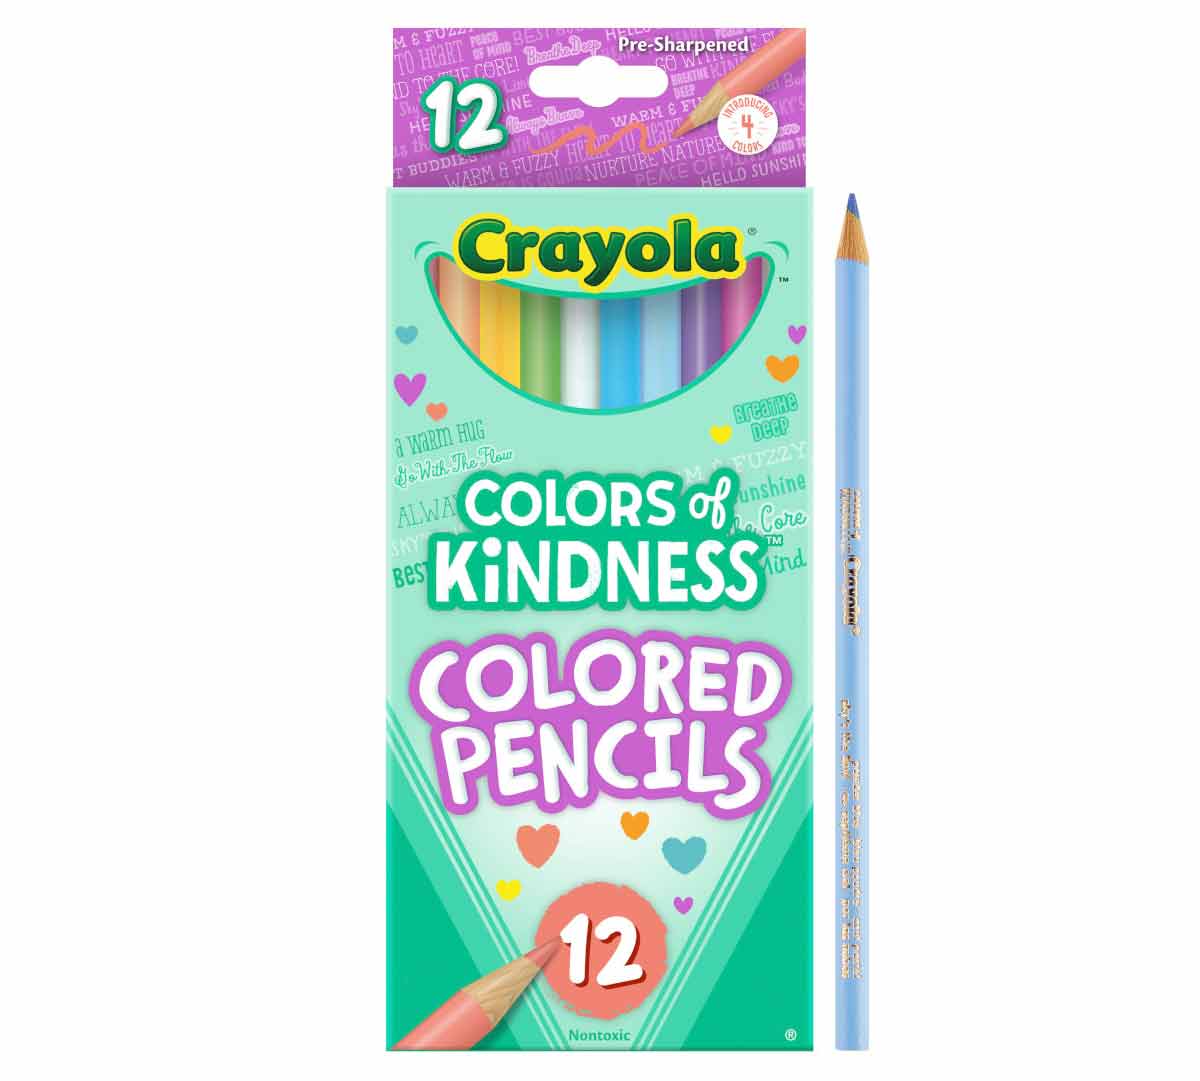 Crayola Colored Pencils  100 Count Review 